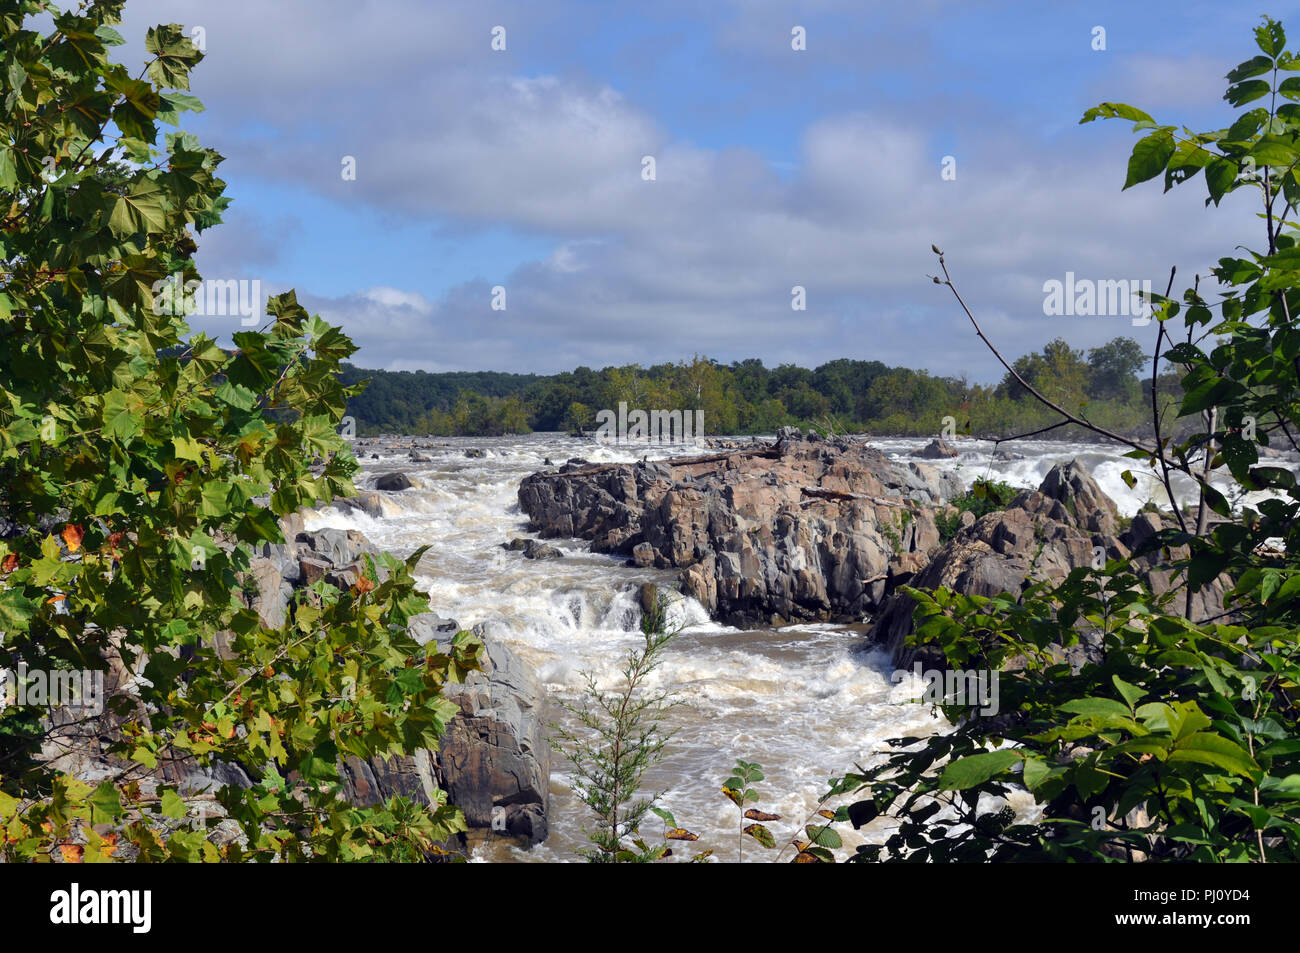 The waterfalls at Great Falls Park in Virginia with trees and a cloudy blue sky. Stock Photo